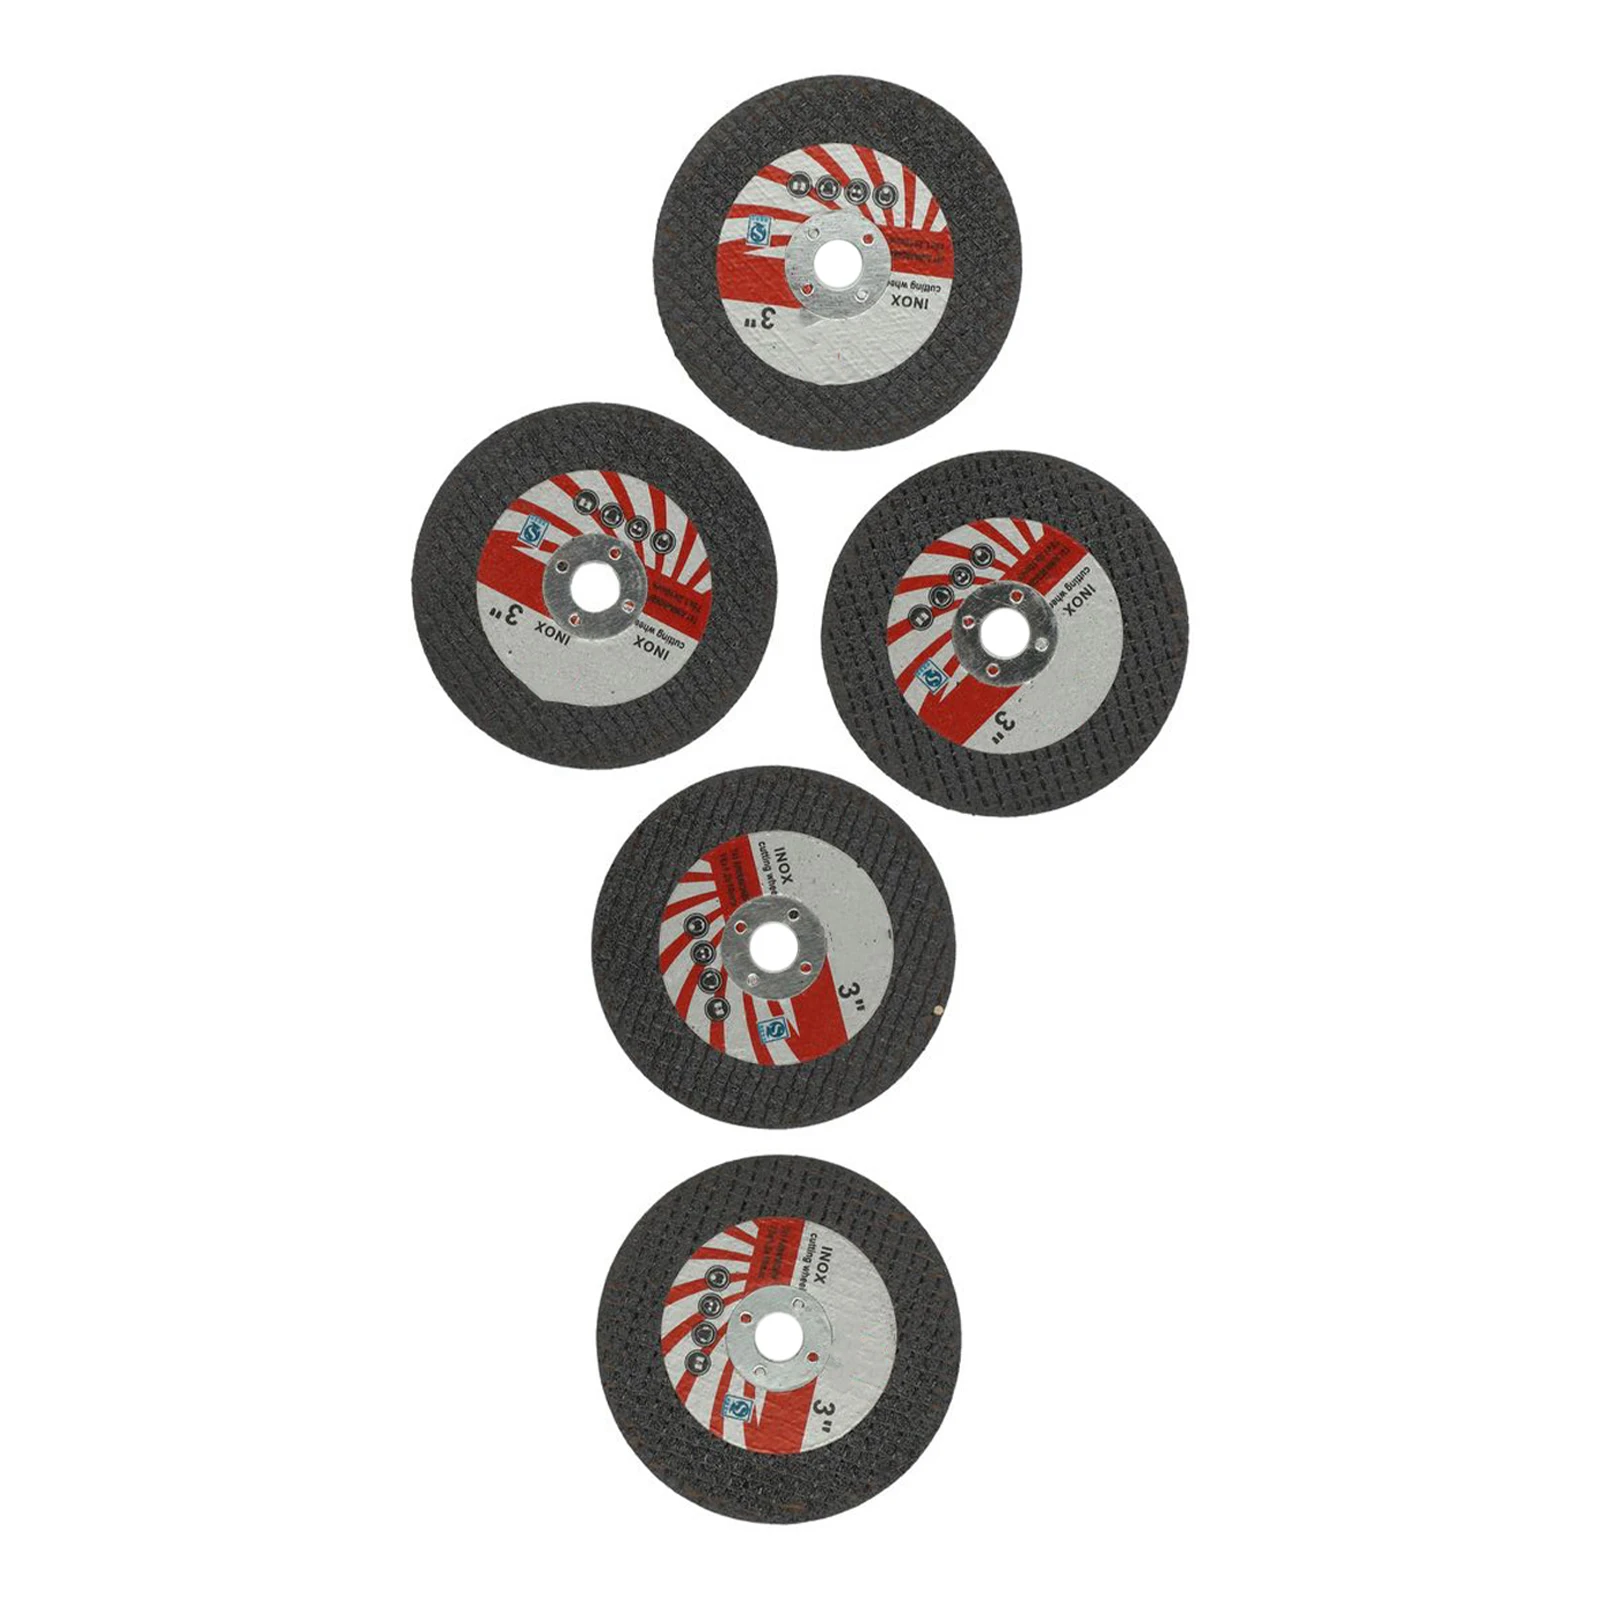 5pcs 75mm Mini Cutting Disc Circular Resin Grinding Wheel Saw Blade Angle Grinder Attachment Cutting Polishing Disc Kit 5pcs mini cutting disc circular resin grinding wheel 75mm for angle grinder replacement rotary tool saw blade abrasive